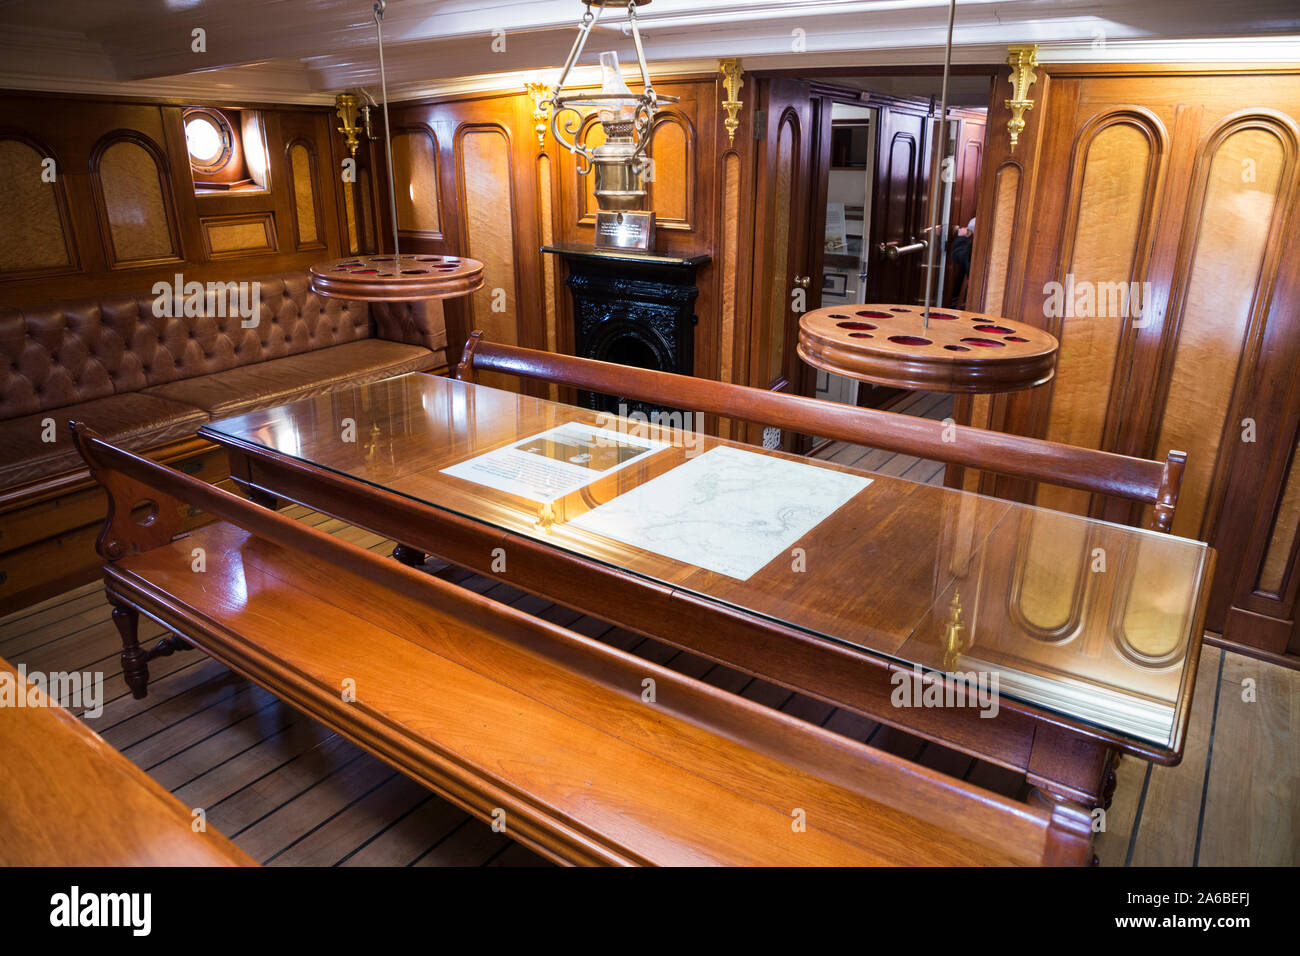 The Saloon on the sailing ship Cutty Sark, for use by the ships Officers. It is appointed with fine polished timbers and wood. Drinks holders are on self-levelling gimbals. (105) Stock Photo